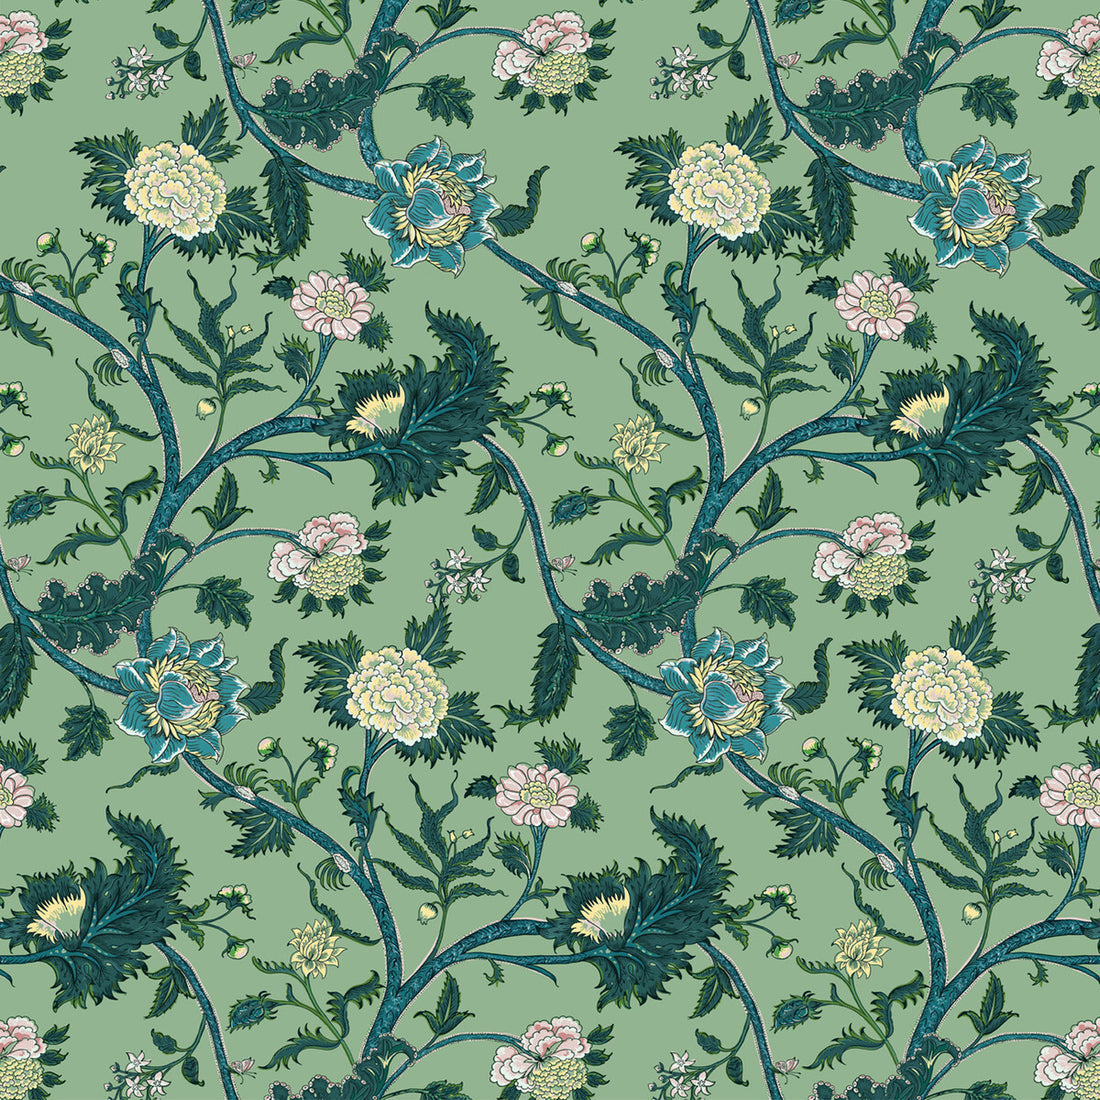 Palampore fabric in verde color - pattern GDT5545.002.0 - by Gaston y Daniela in the Gaston Libreria collection